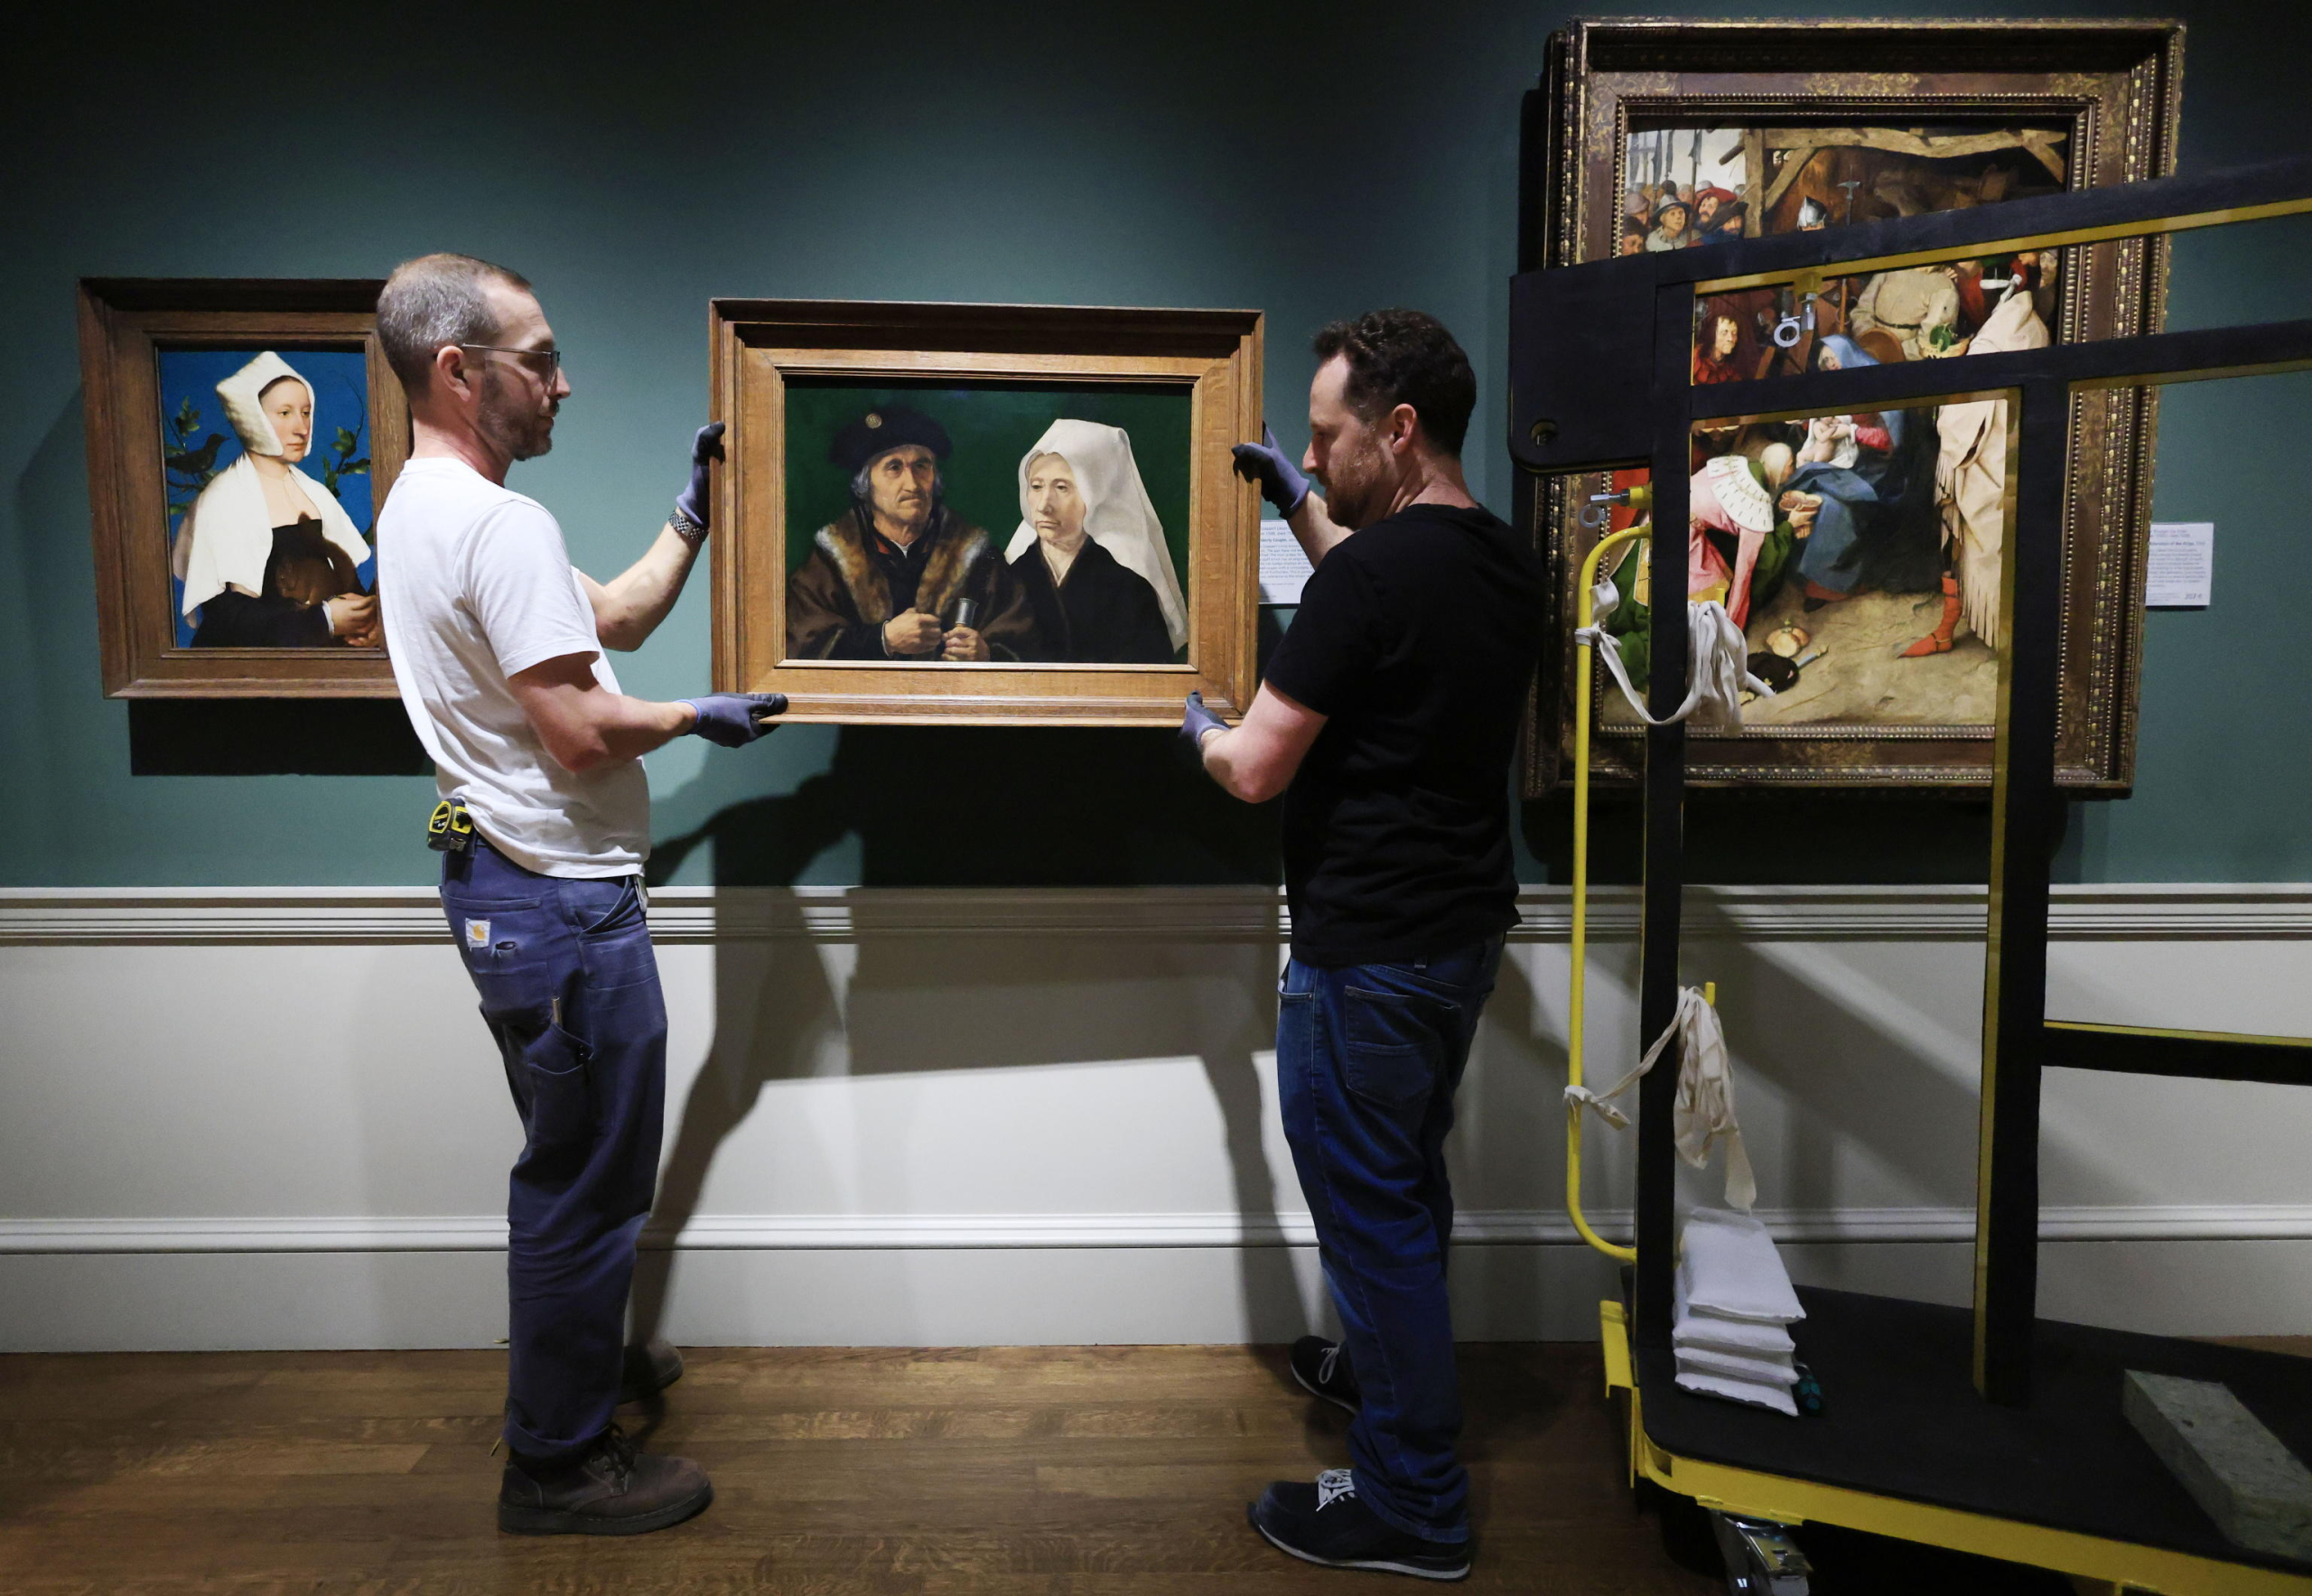 epa11328623 Art handers hang the work 'An Elderly Couple' by Dutch artist Jan Gossaert in the National Gallery in London, Britain, 09 May 2024. On 10 May 2024 the National Gallery celebrates its Bicentenary. The National Gallery was established in 1824 with the first 38 paintings donated by banker John Julius Angerstein. The collection was initially displayed in a townhouse at 100 Pall Mall. After this became too small,  a new building was completed on Trafalgar Square in 1838 designed by the architect William Wilkins. The art collection currently comprises 2,300 works, spanning the major traditions of Western European painting with works by Van Gogh, Caravaggio, Turner, Constable, Michelangelo, Velazquez and Rembrandt. The National Gallery building welcomed over three million visitors in 2023,  which is open 361 days a year, free of charge. The National Gallery will mark the bicentenary year with 12 months of events celebrating art and creativity across the UK.  EPA/NEIL HALL  ATTENTION: This Image is part of a PHOTO SET